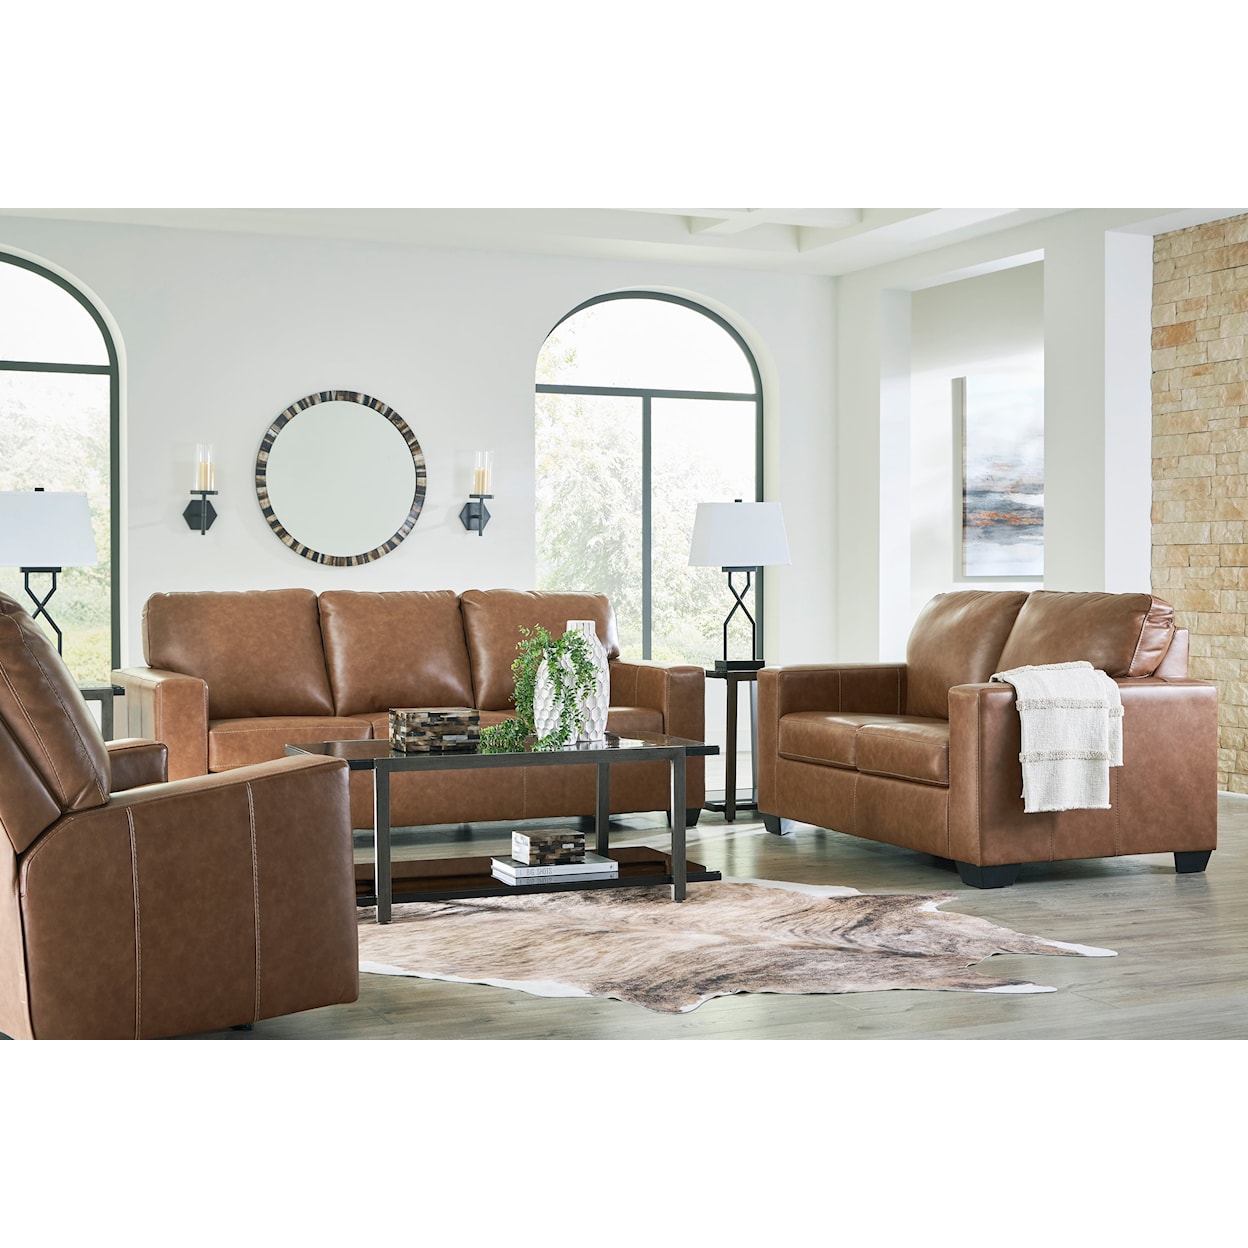 Signature Design by Ashley Brody 3-Pc Living Room Set